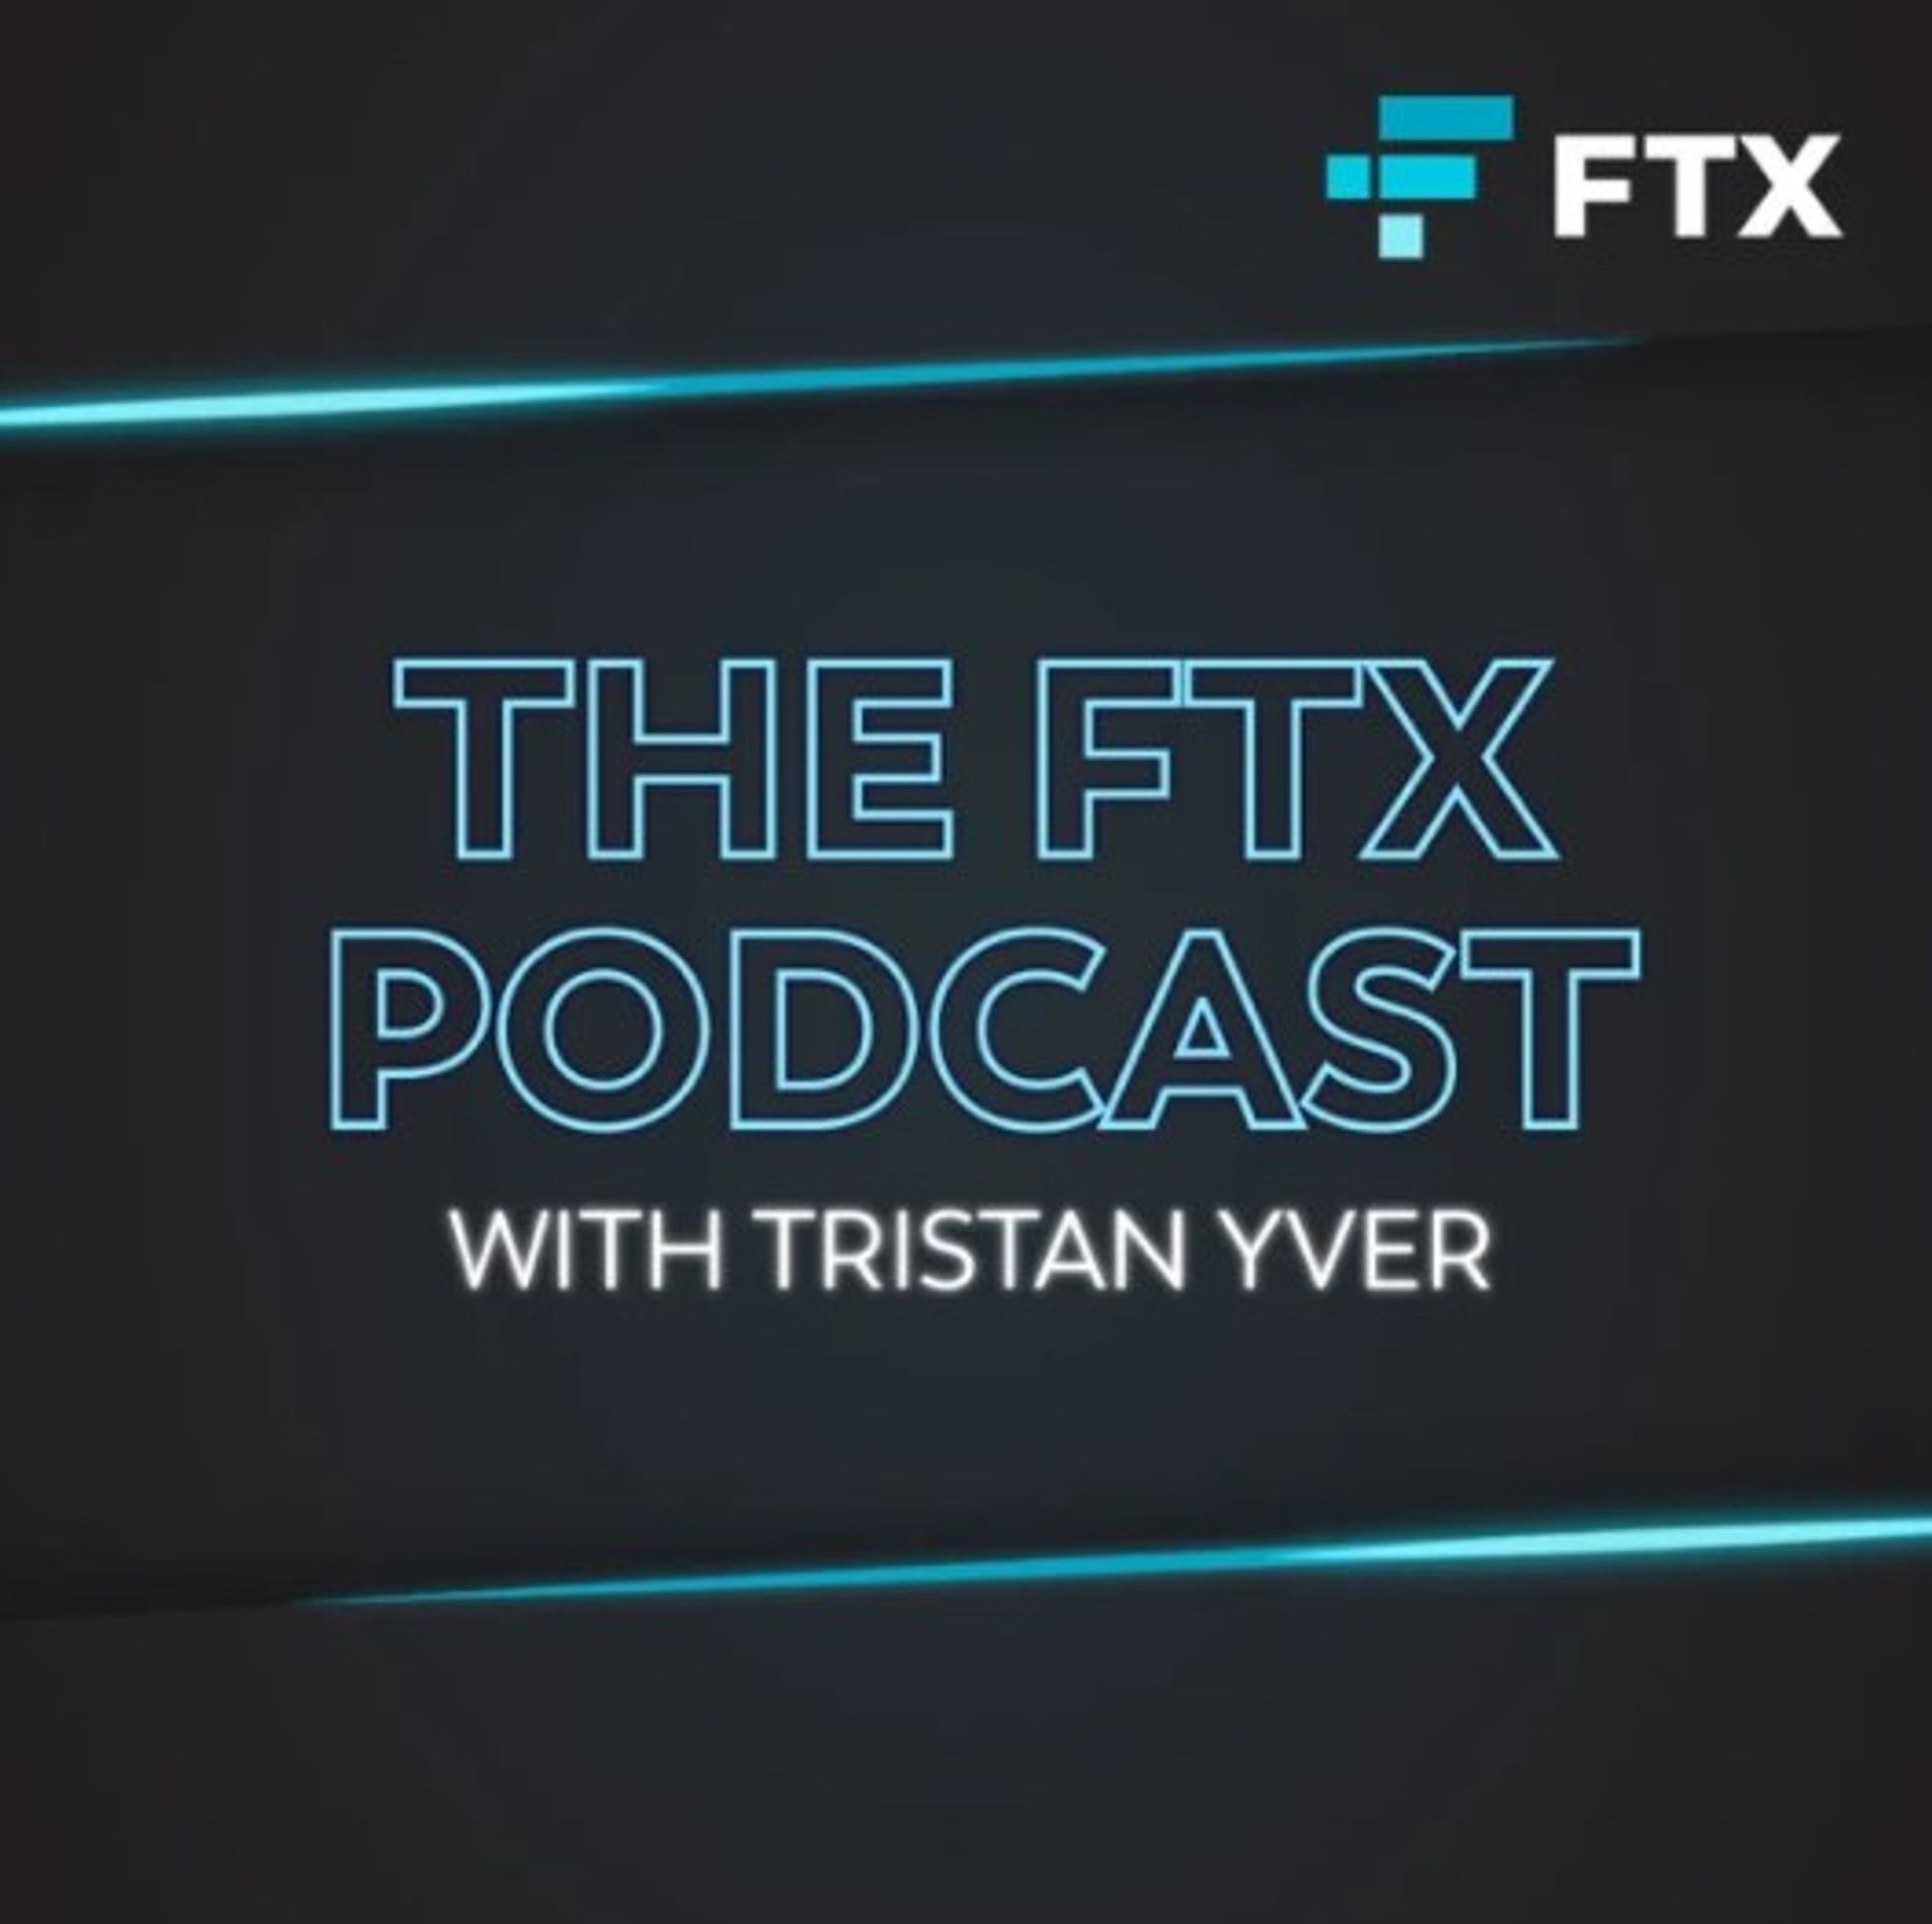 The FTX Podcast